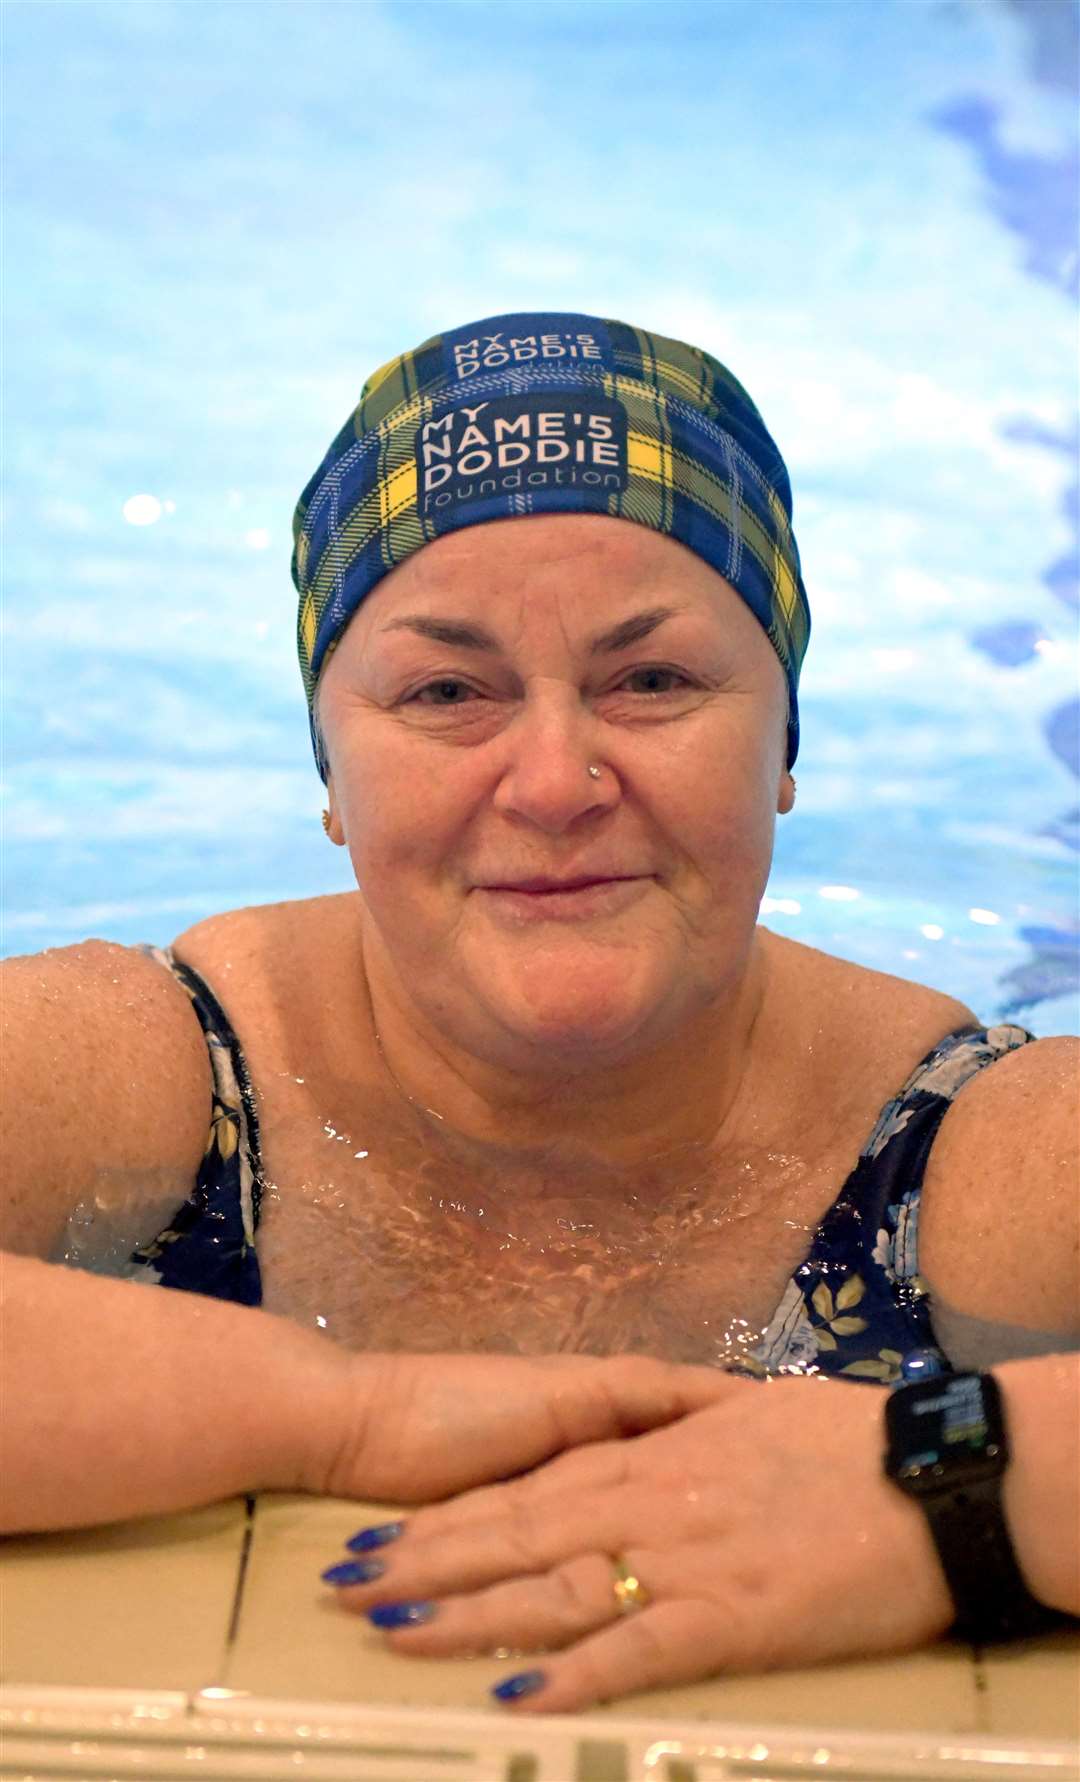 Tracey Maclaren swam to raise money for the My Name's Doddie Foundation. Picture: James Mackenzie